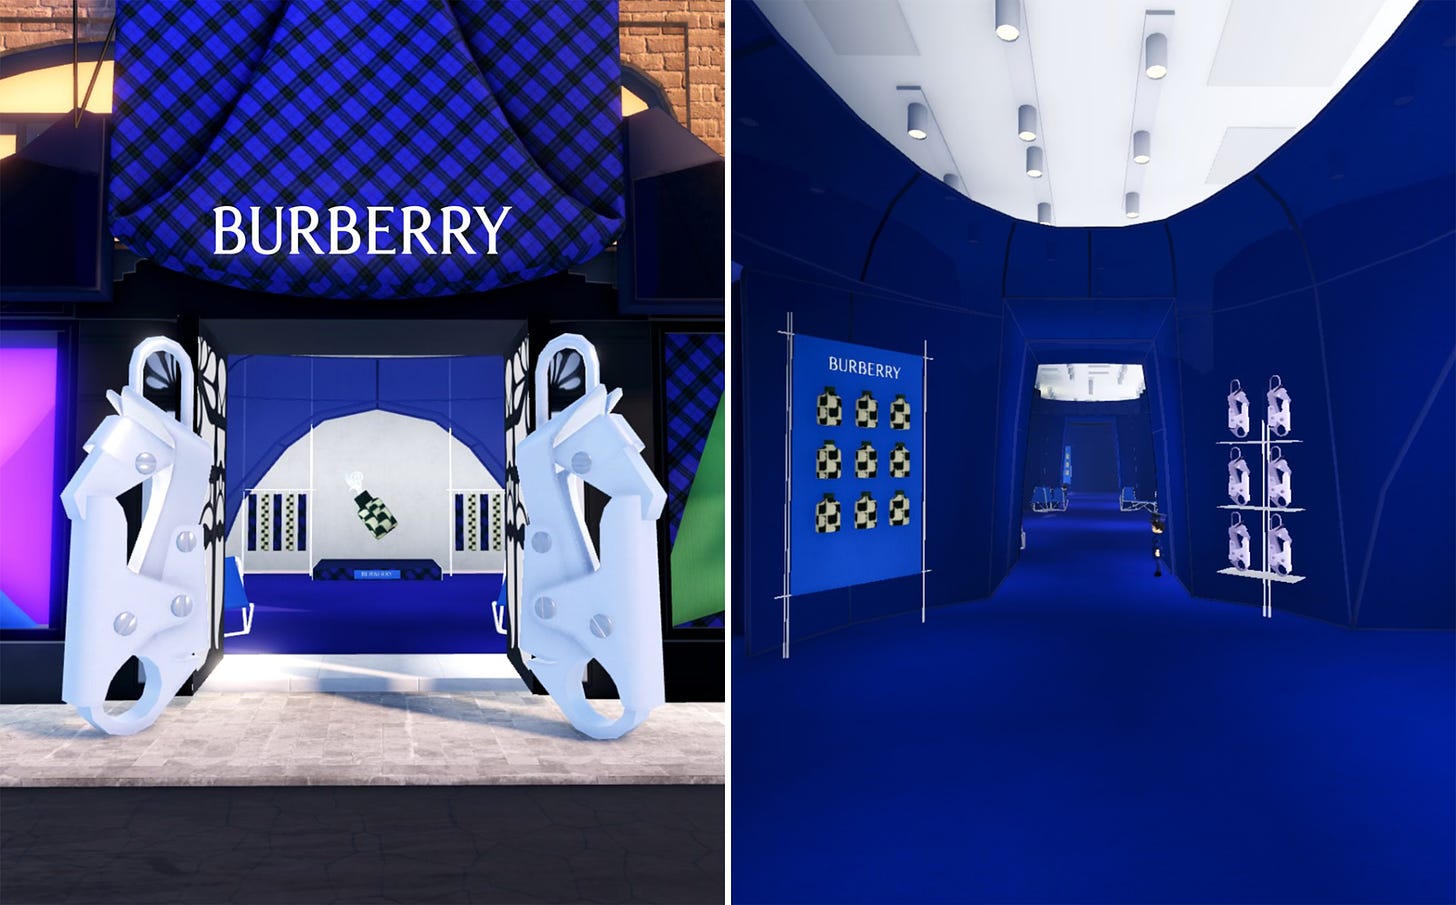 Exterior and interior view of the Burberry storefront in the Burberry at Harrods Roblox experience